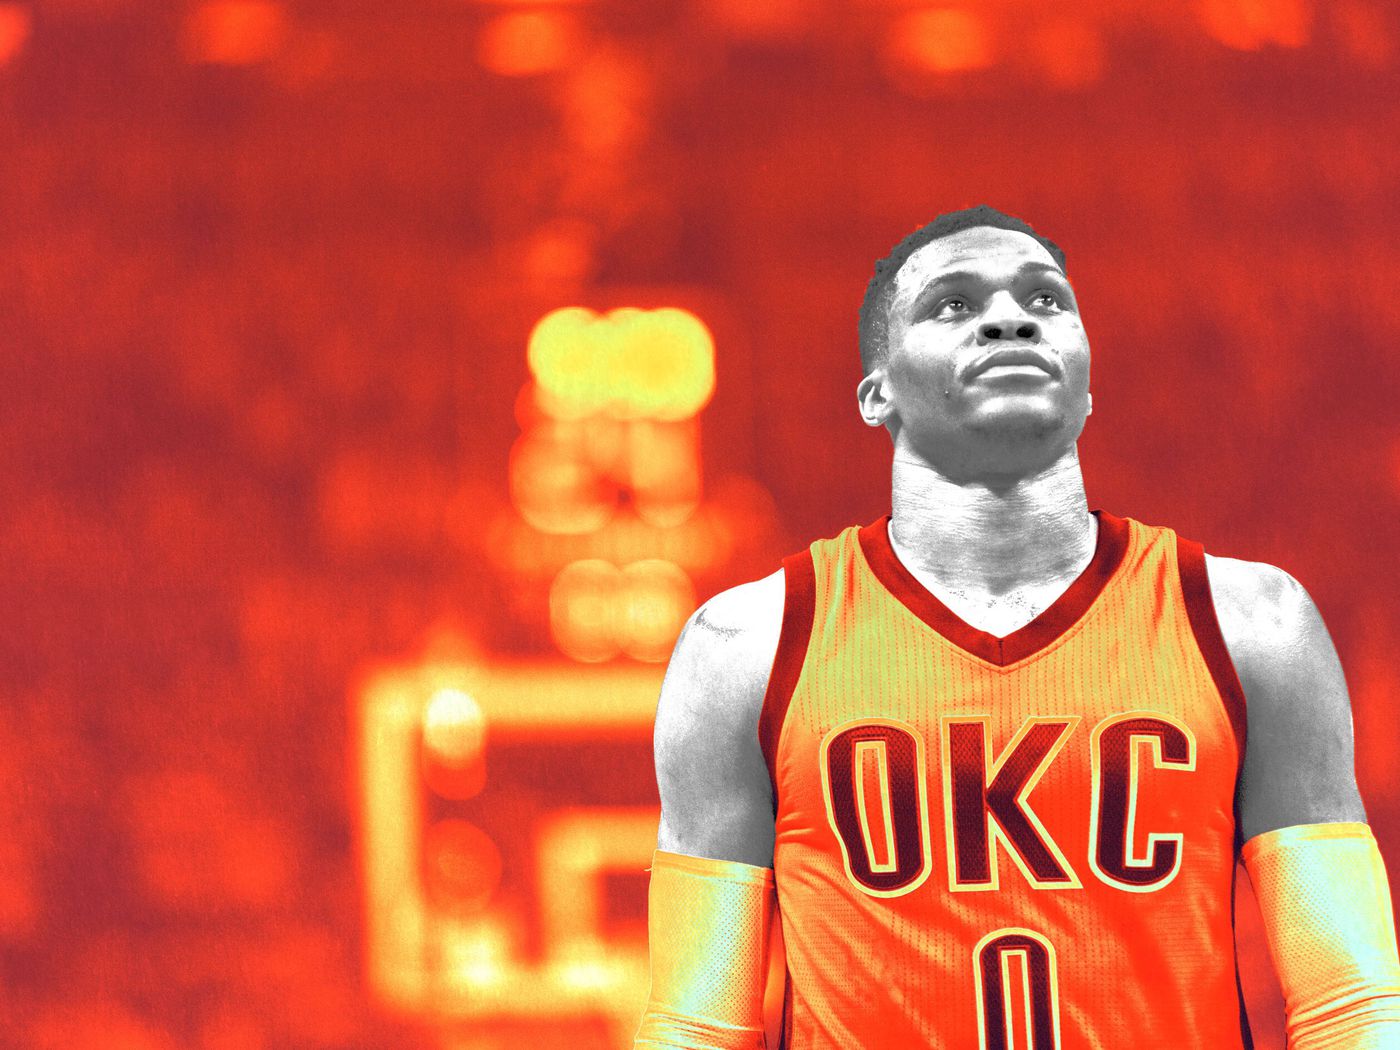 Open Floor NBA podcast: Is Russell Westbrook the reason Paul